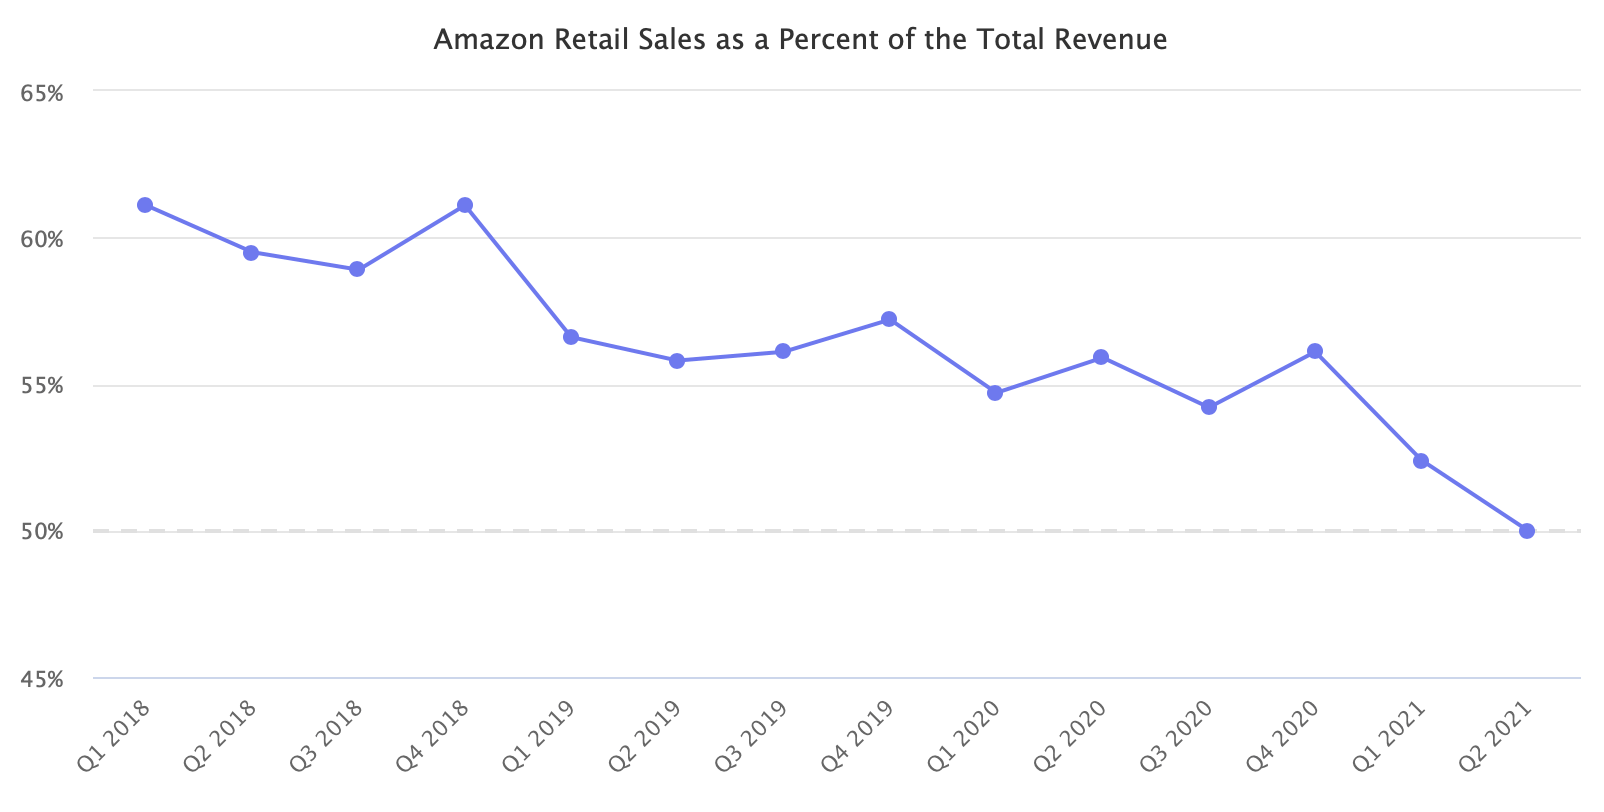 Amazon Retail Sales as a Percent of the Total Revenue